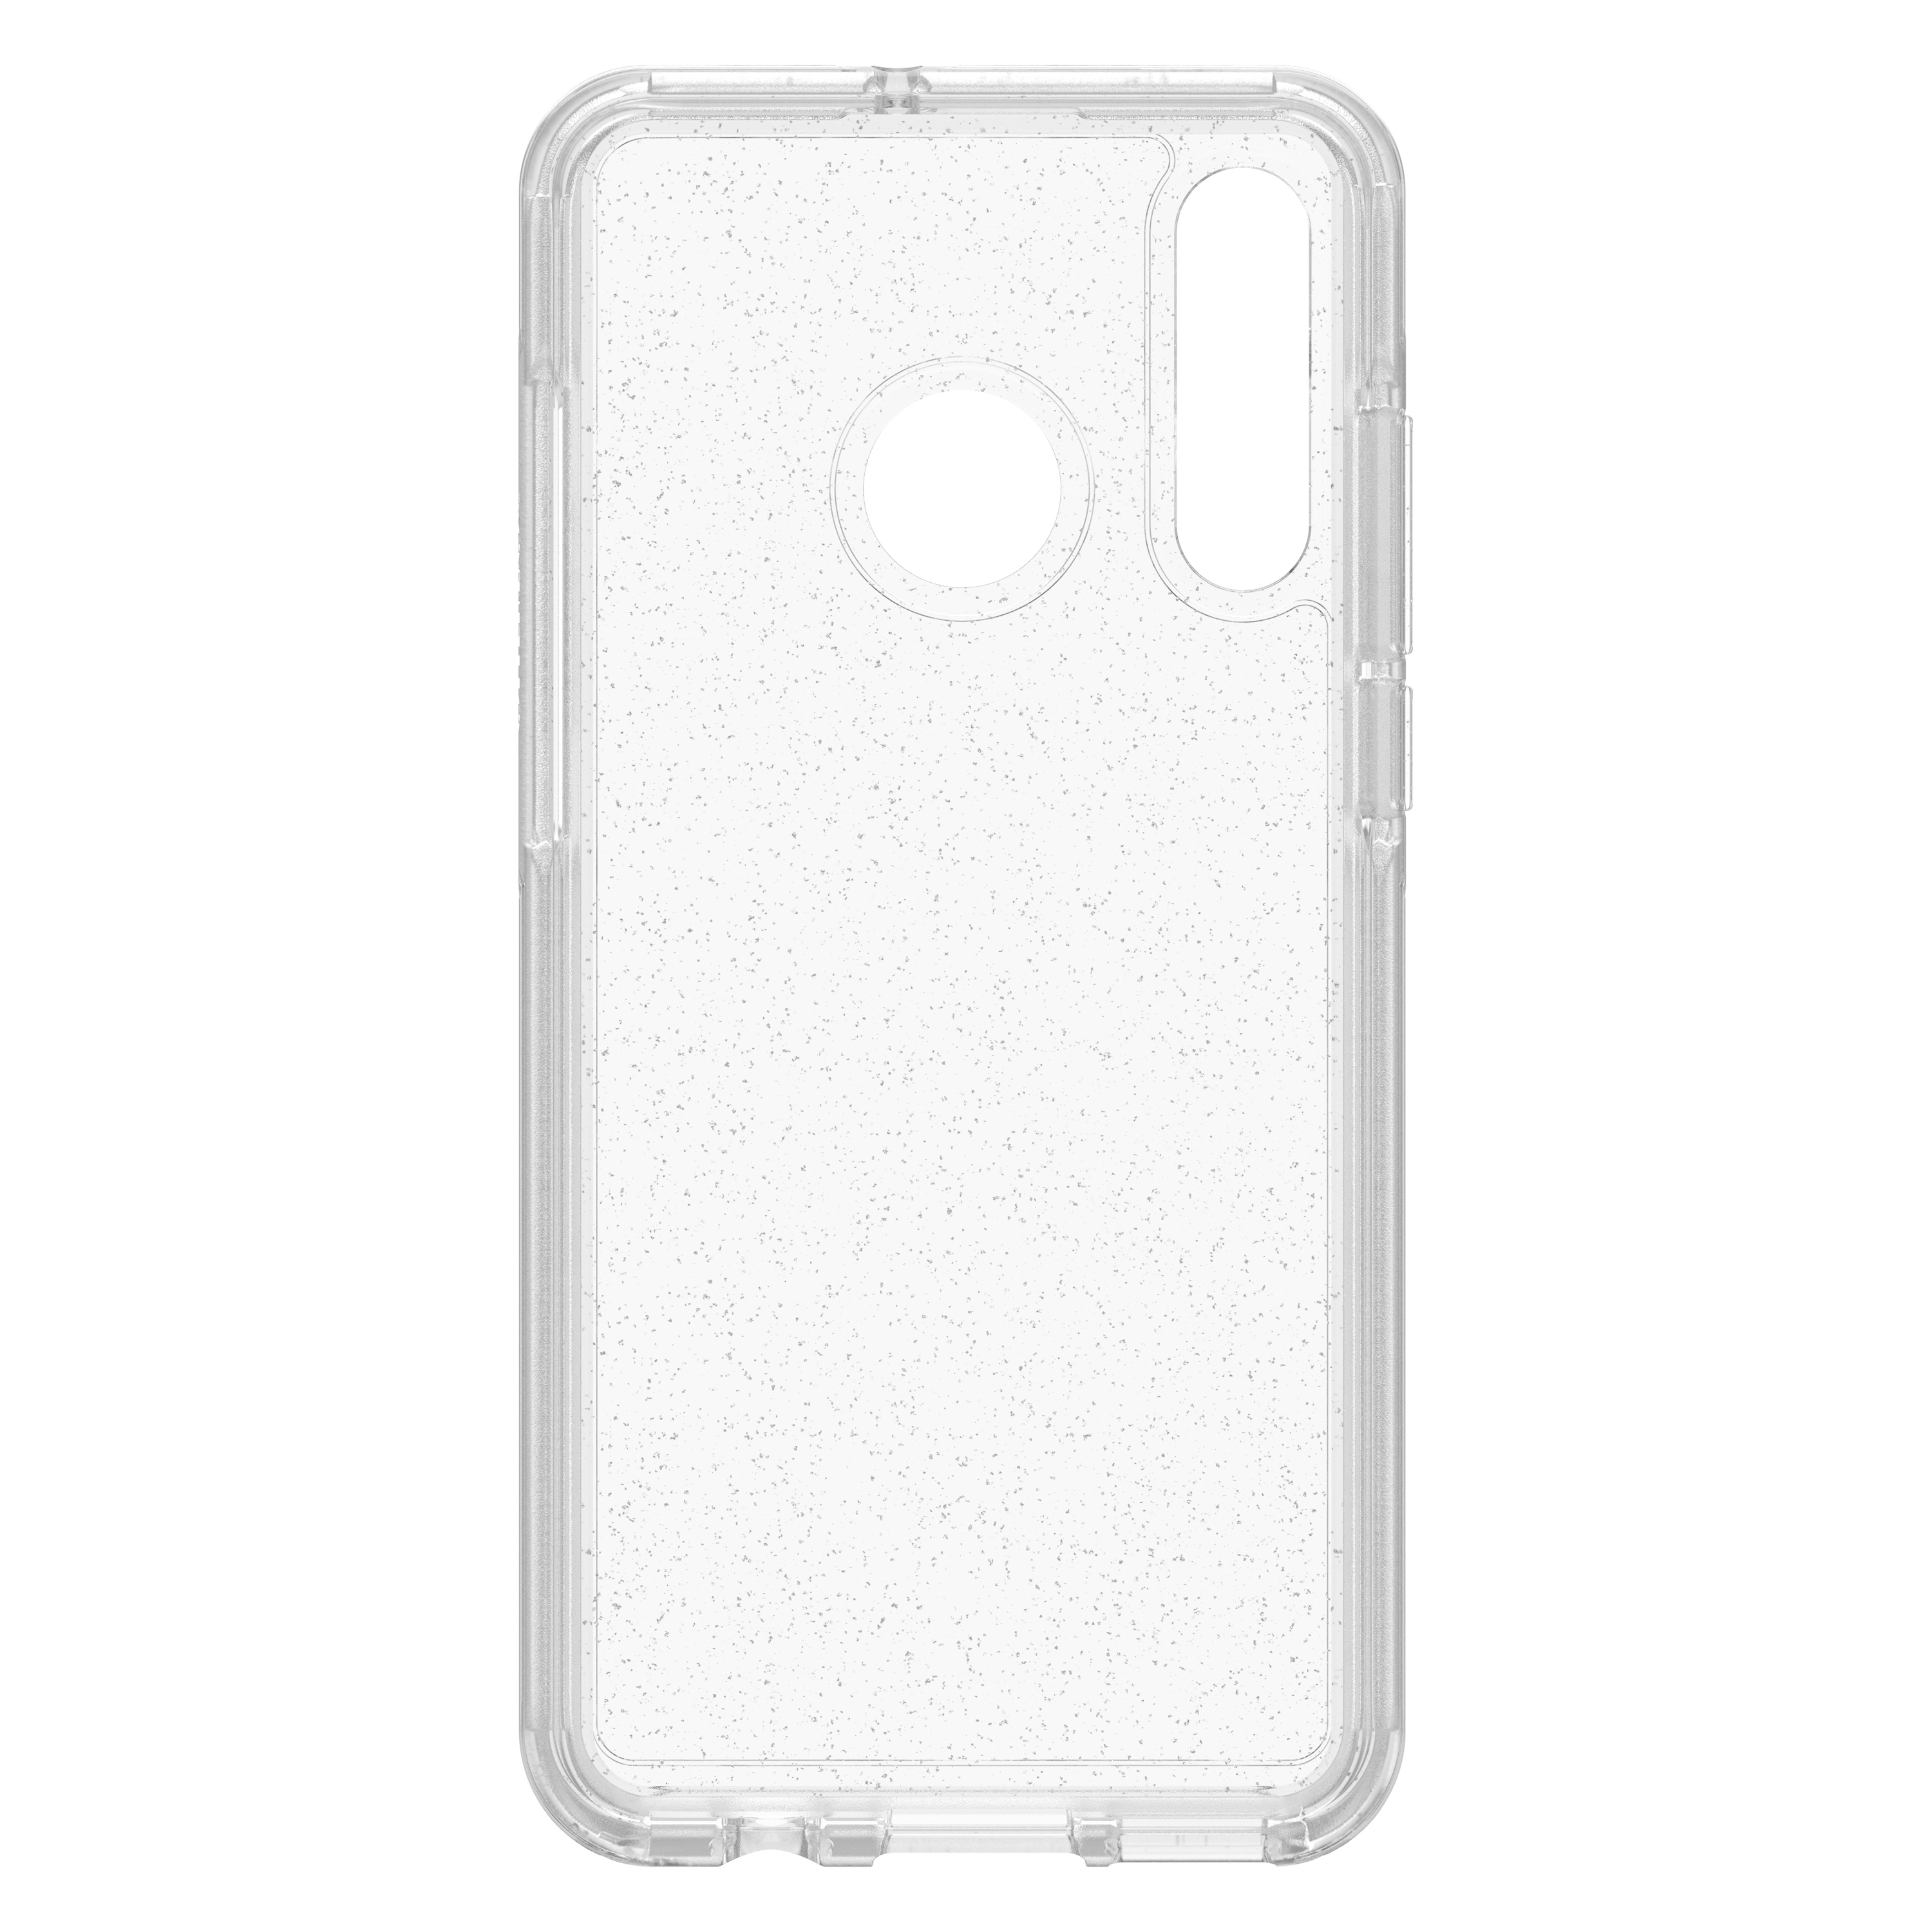 OTTERBOX Symmetry, Backcover, Huawei, P30 Transparent Lite